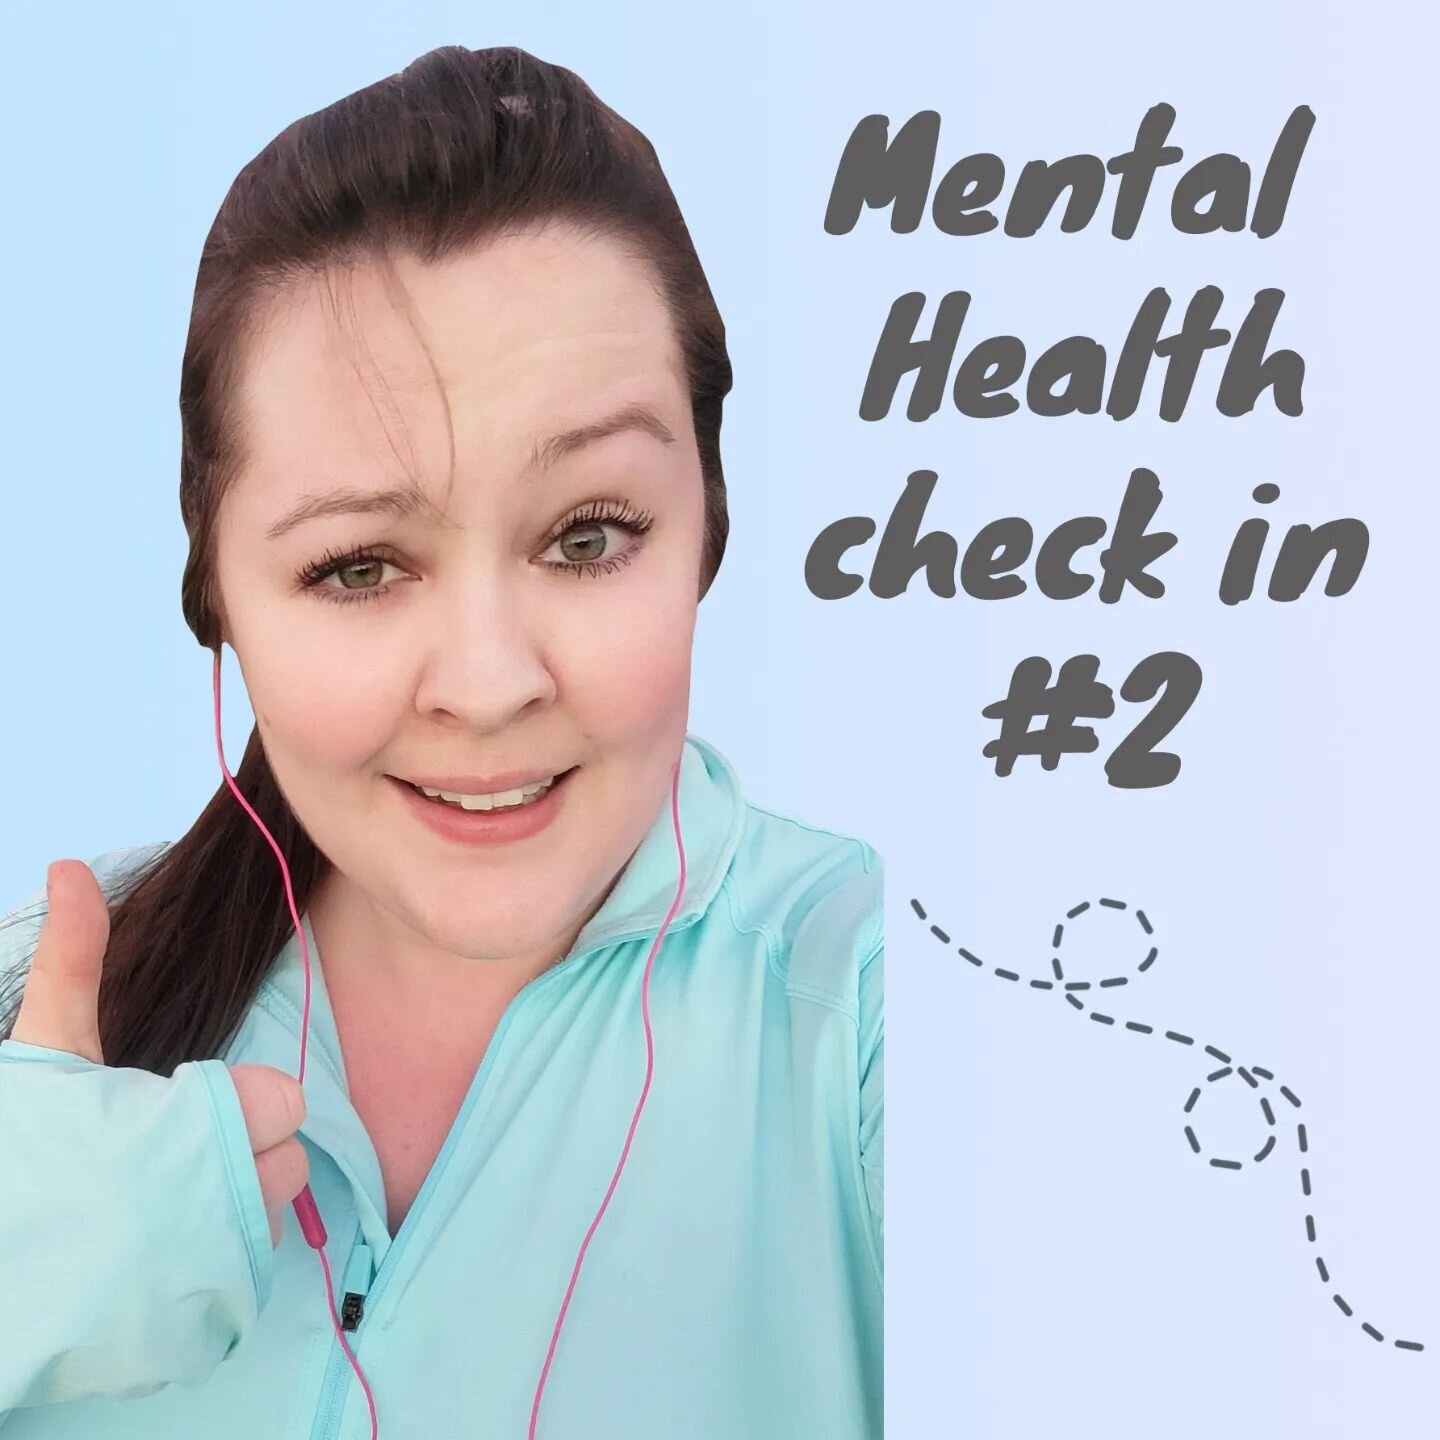 My new semi-regular feature where I tell you where my mental health's at and you share the same in the comments. With our busy lives - or statically quiet ones due to ill health - we often don't take the time to voice out loud what's really going on.